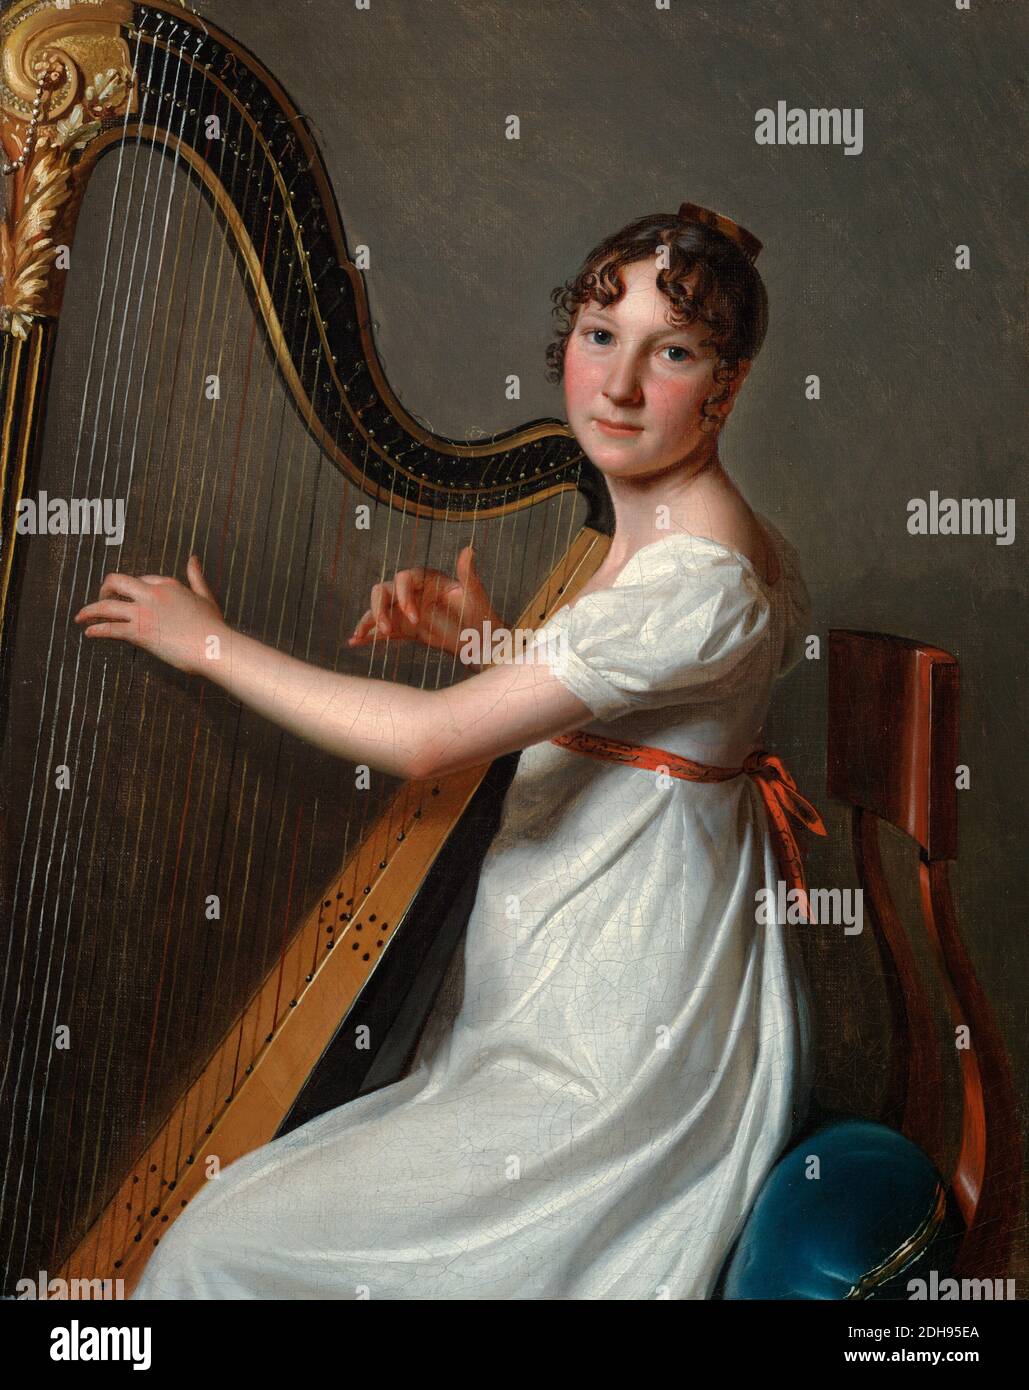 The Young Harpist, portrait painting by Louis-Léopold Boilly, 1804-1806 Stock Photo